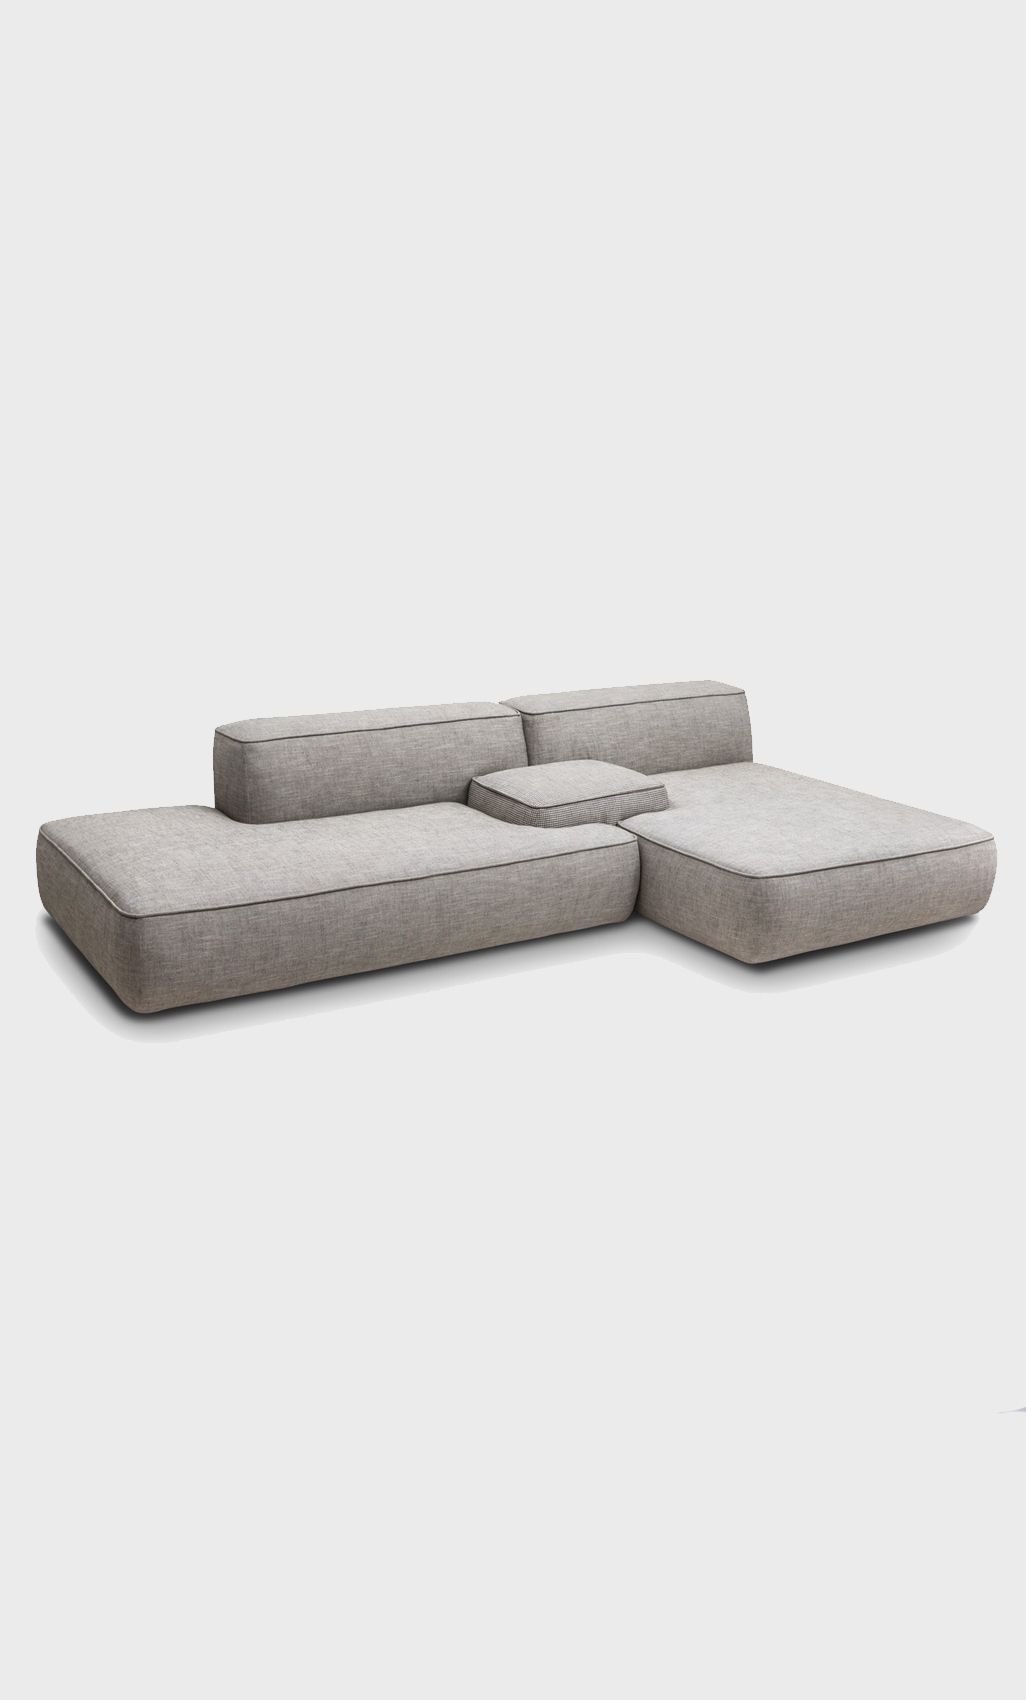 Modular Sofa: No Legs Or Really Small Low Legs | Furniture 2 Within Low Sofas (Photo 5 of 10)